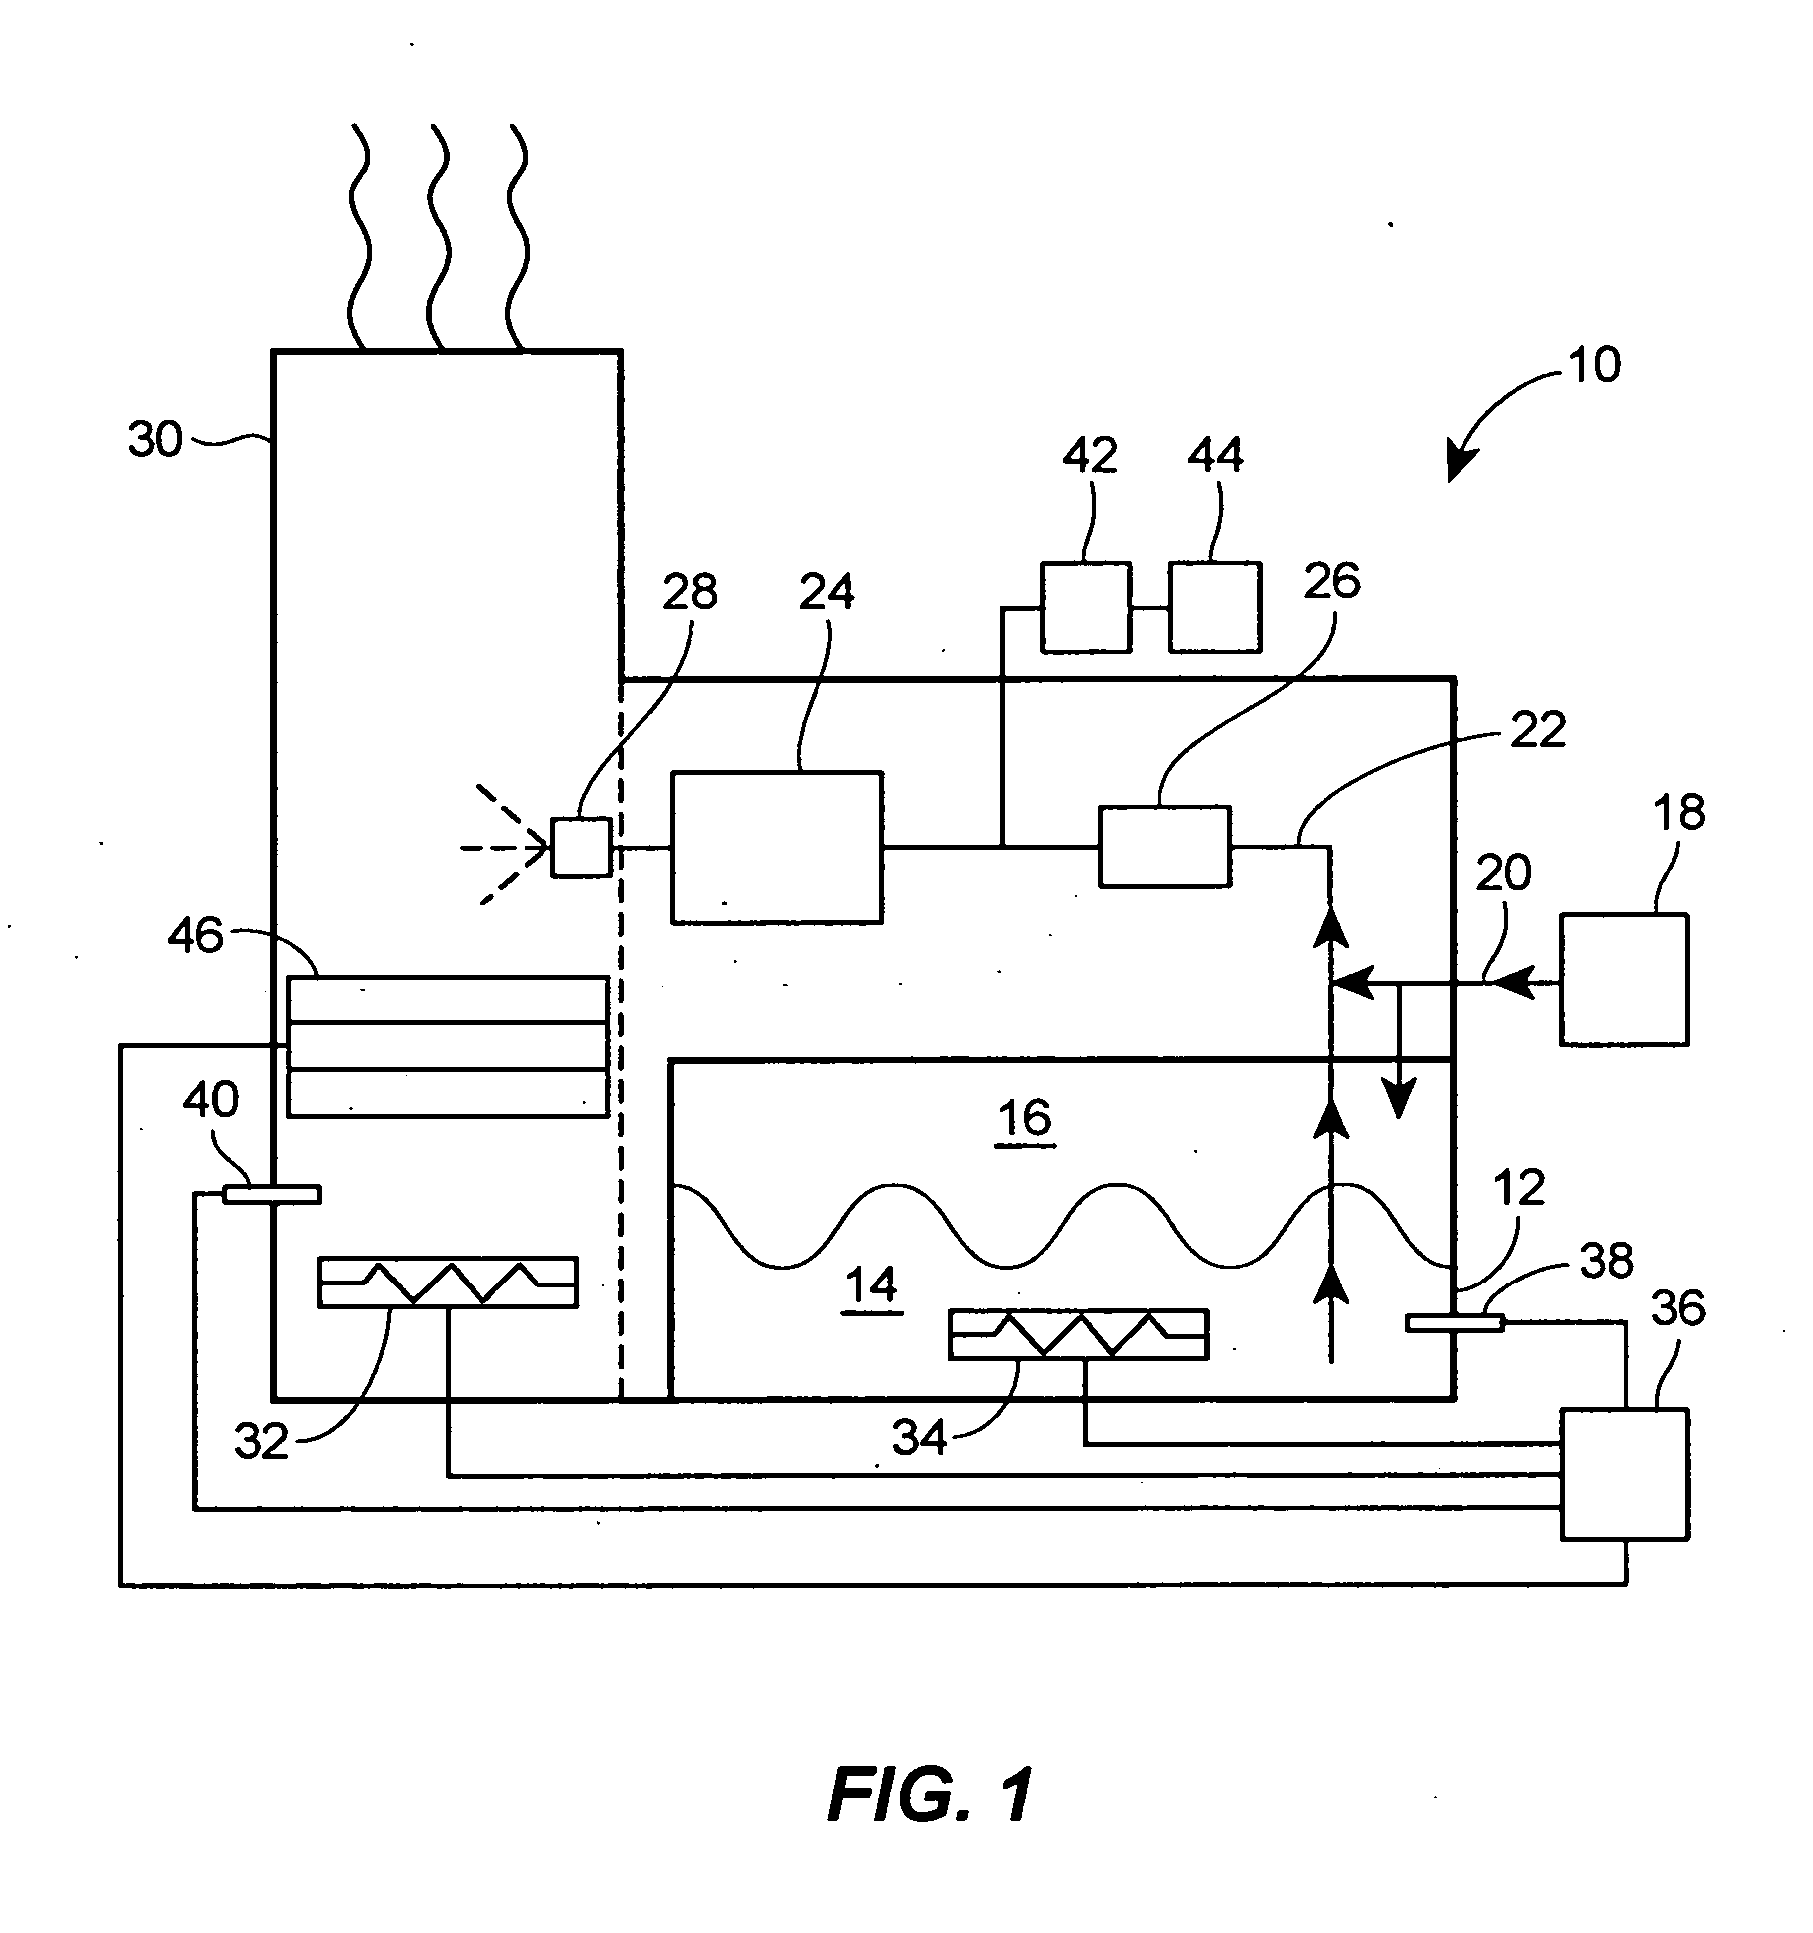 Method and apparatus for generating consistent simulated smoke